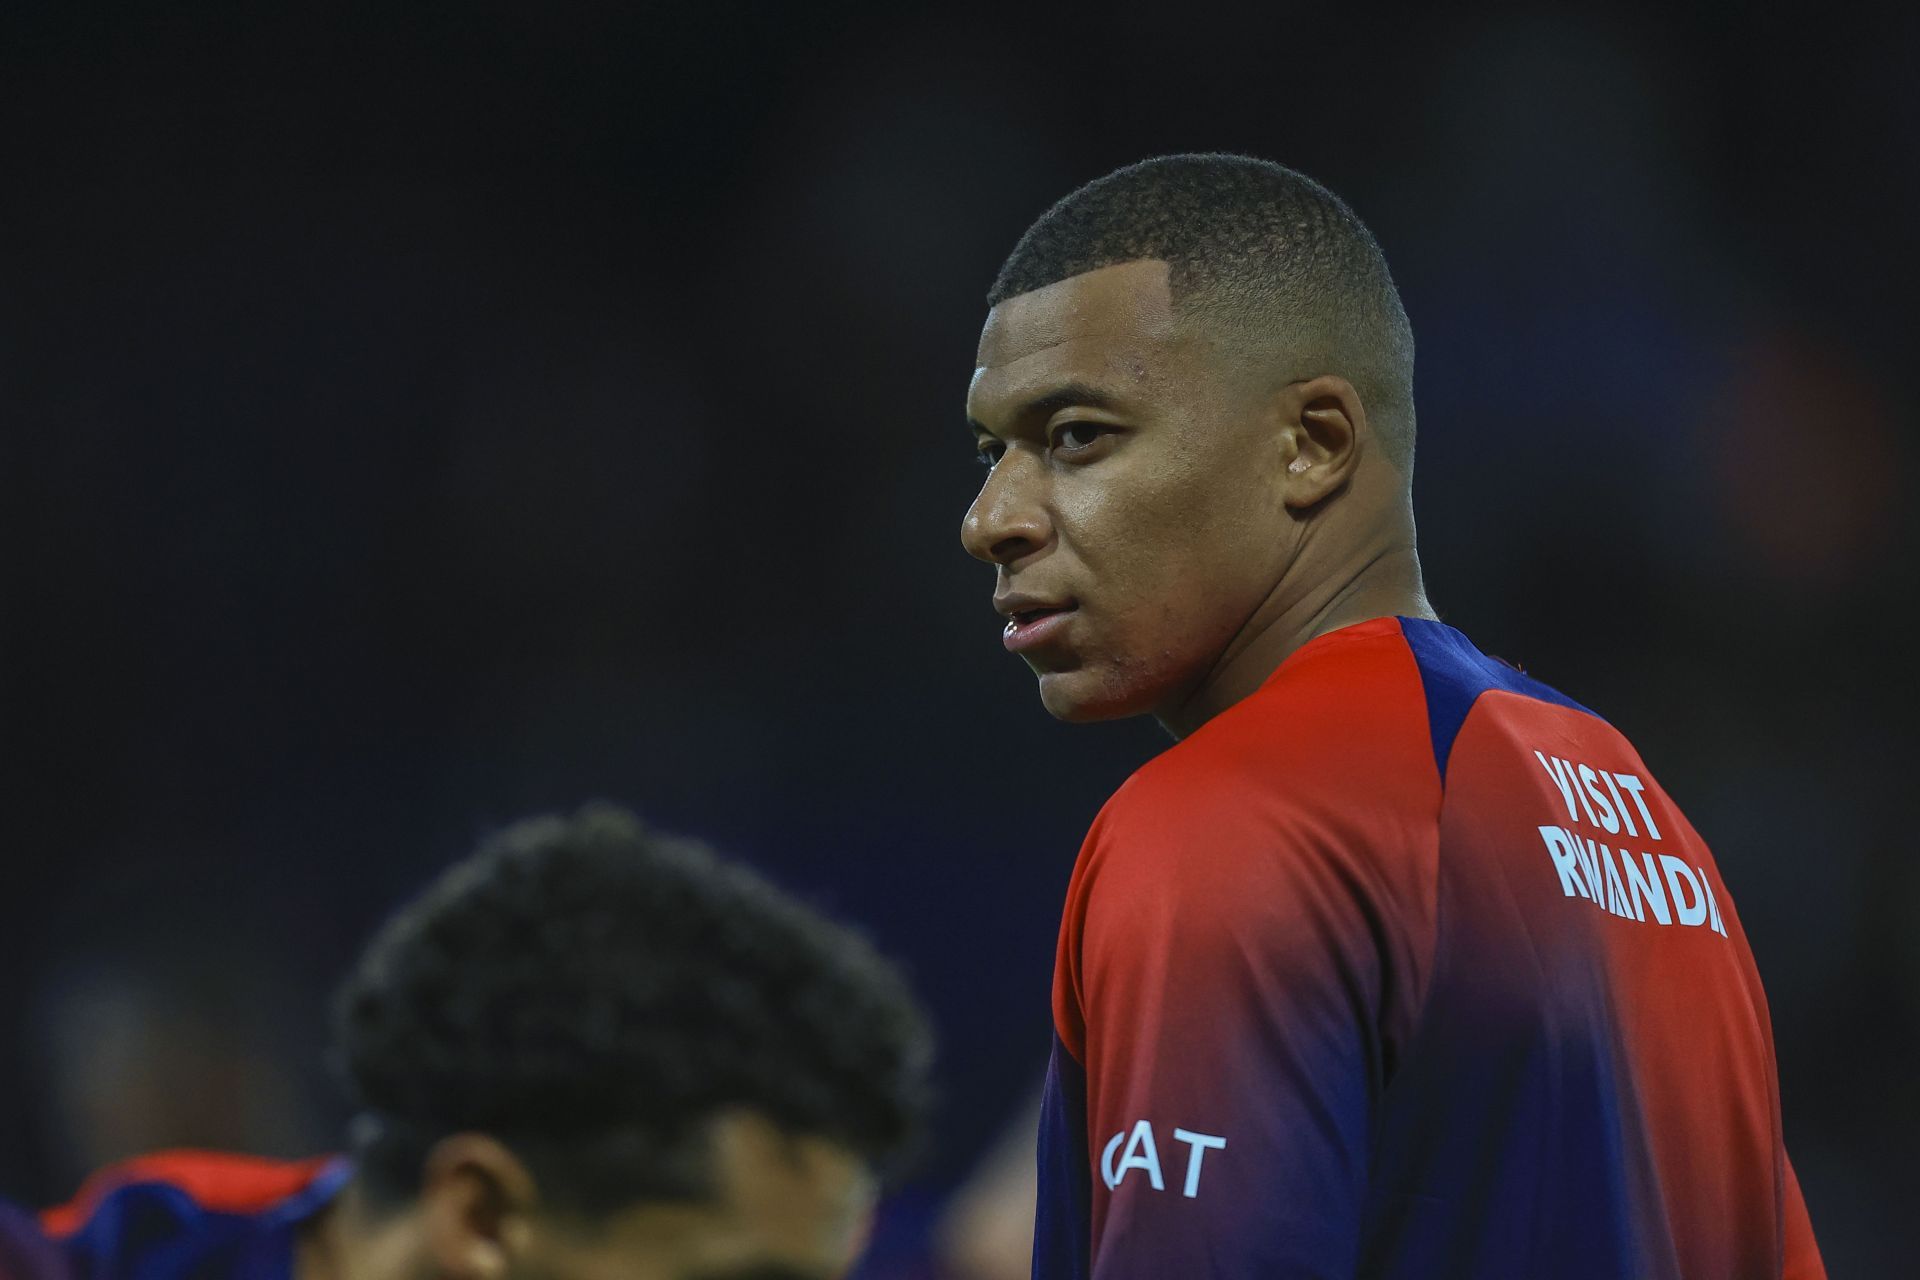 Frank Lebeouf has ruled Liverpool out as a possible destination for Mbappe.